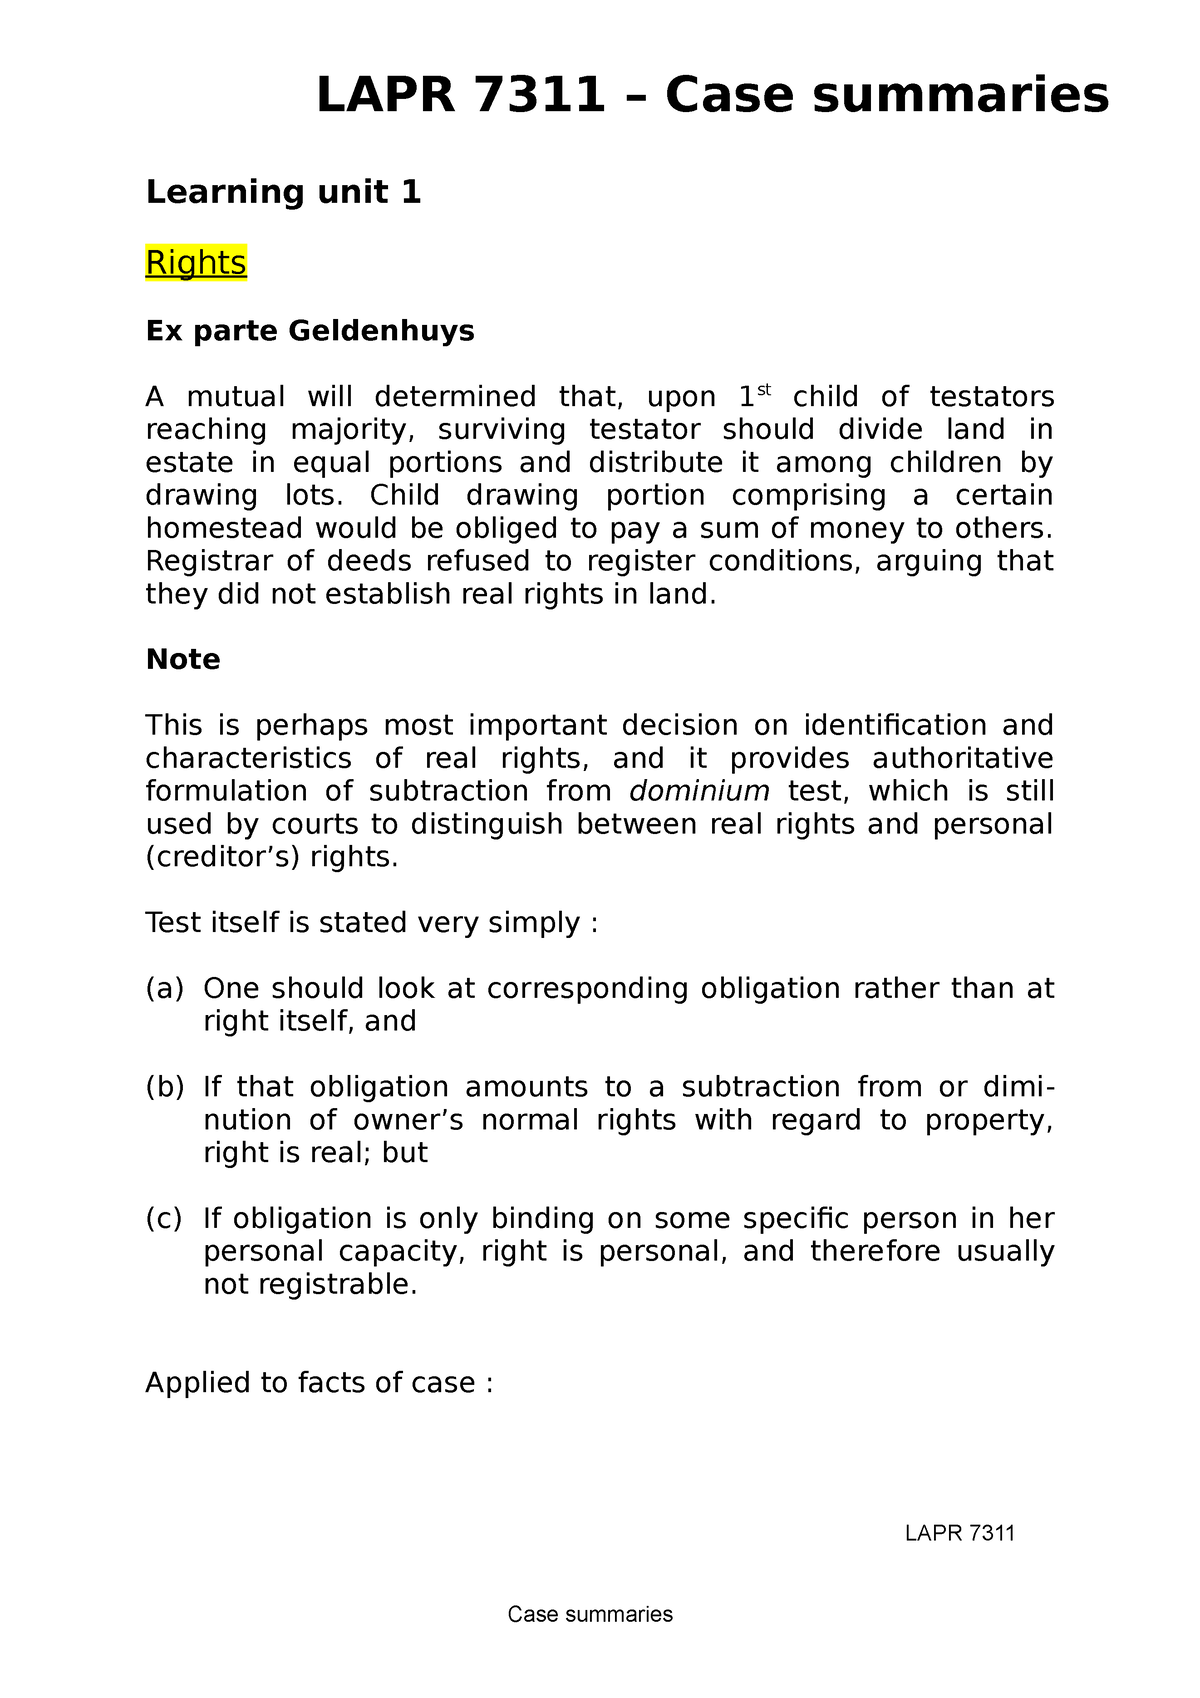 case study 1 property rights answers